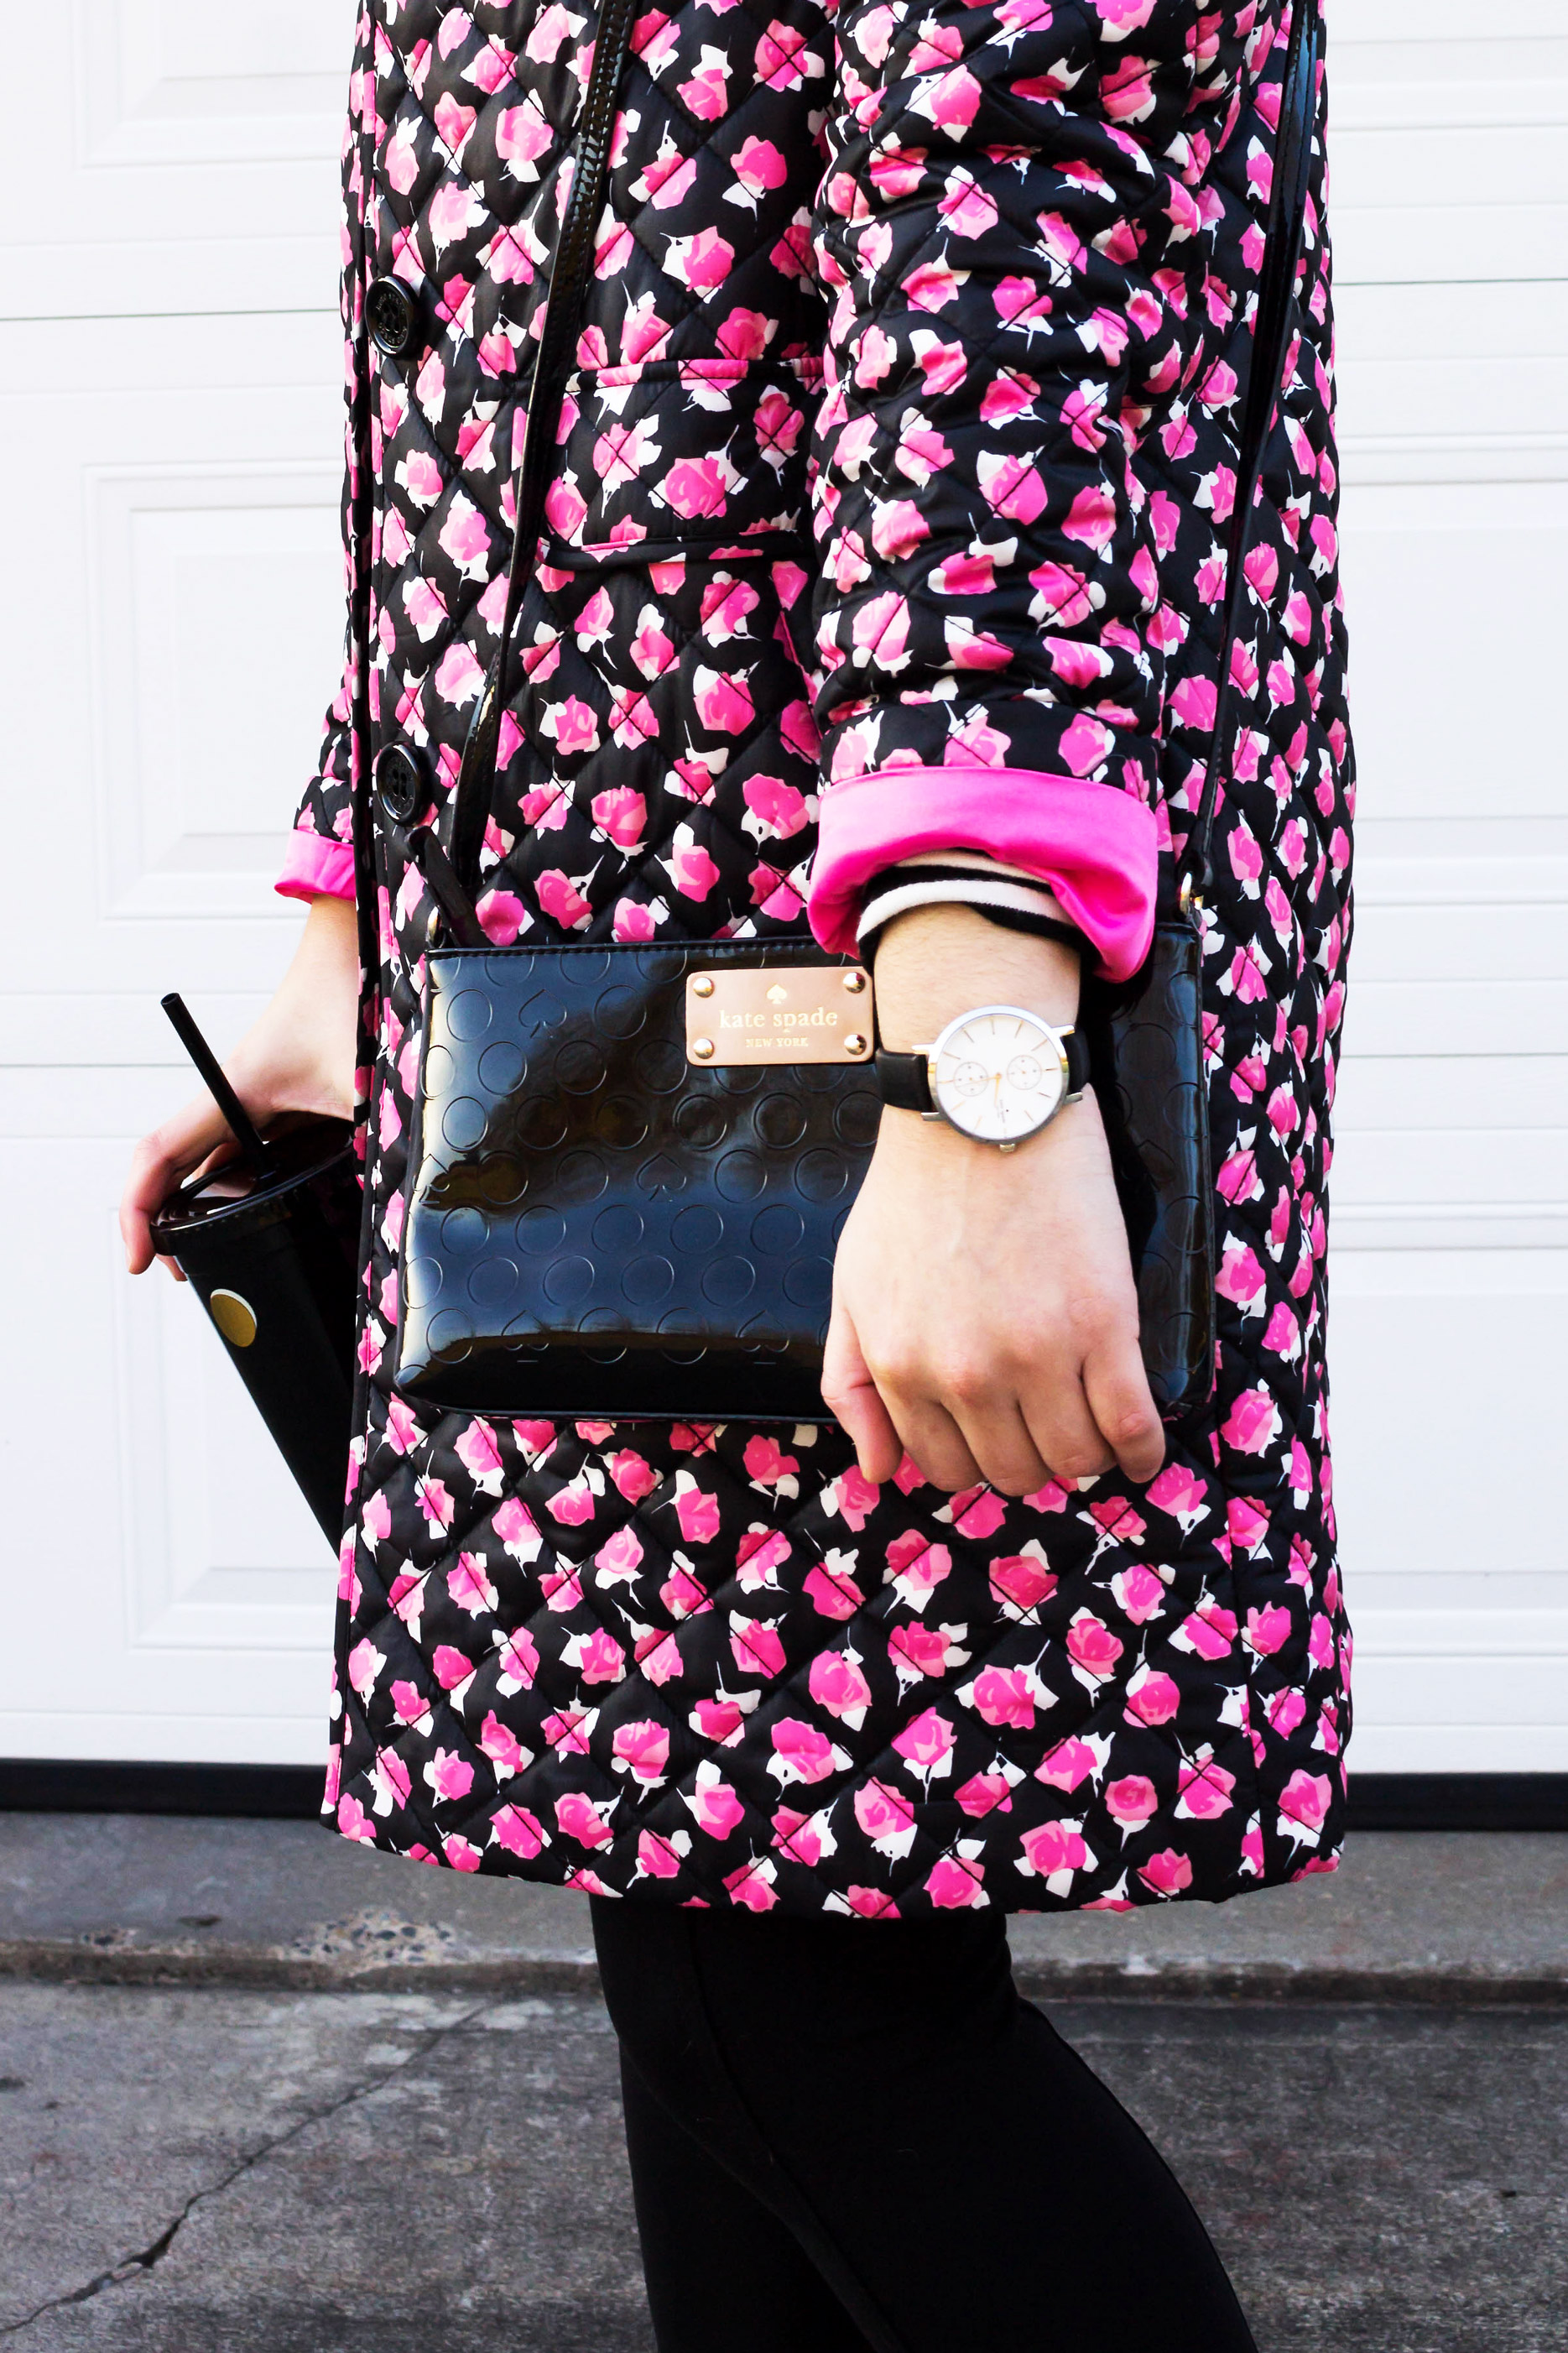 Kate Spade: A Reseller’s Guide